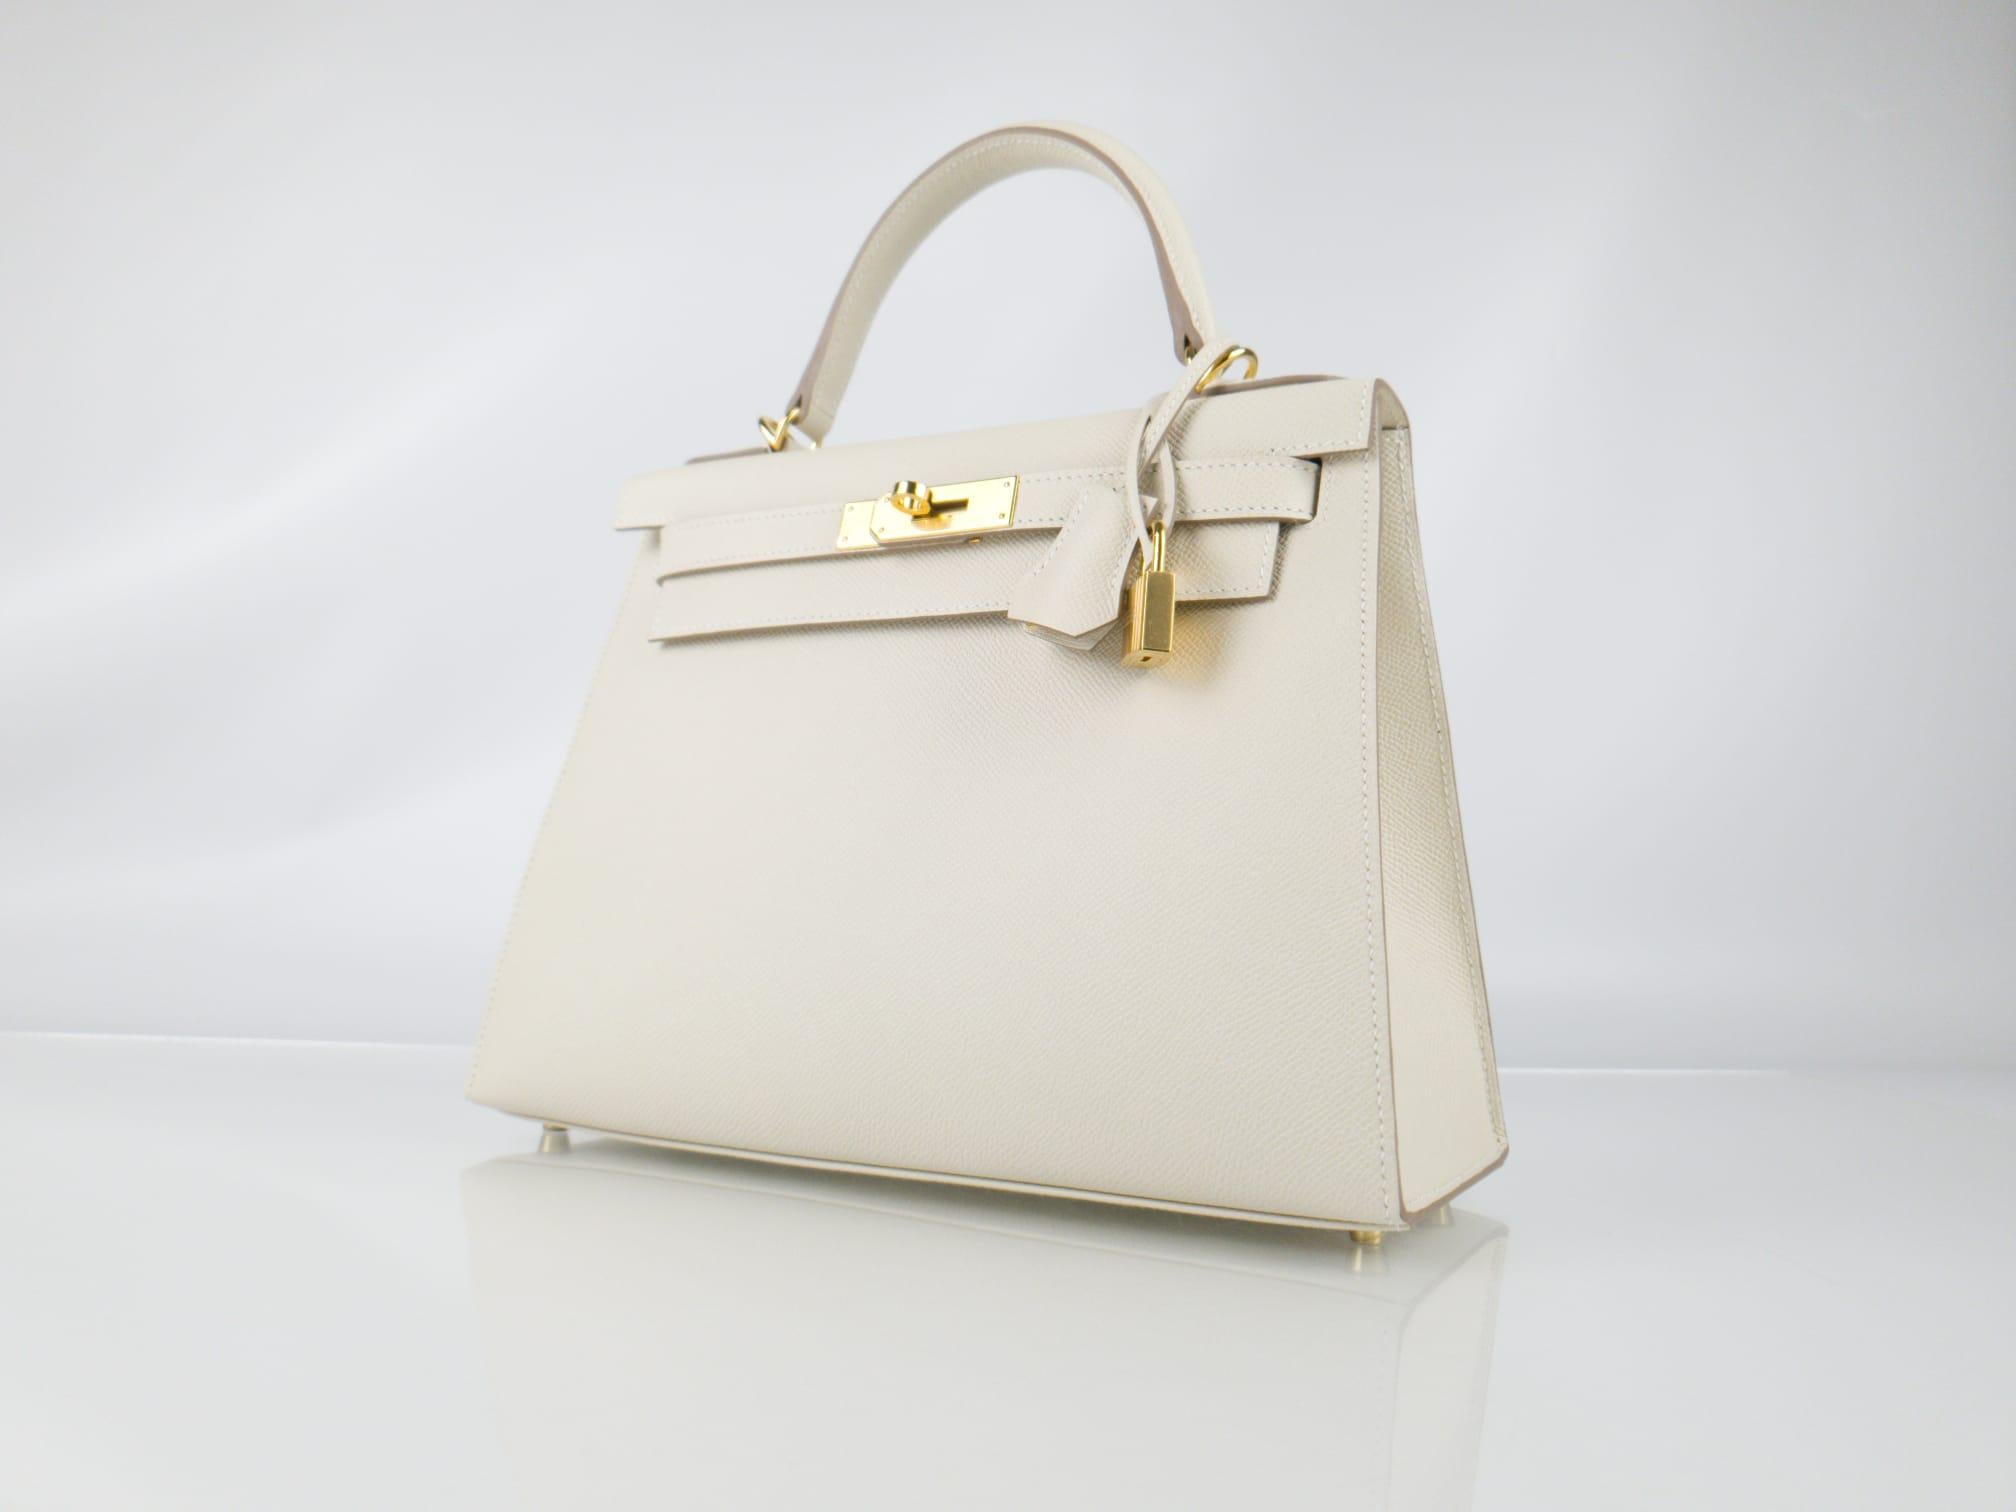 The Kelly bag came to success when it was first paparazzied on the bumpy belly of Princess Grace Kelly in 1956. During the 20 next years, every woman wanted to buy “Grace Kelly’s bag”. Her name became so linked to the bag that Hermes renamed the